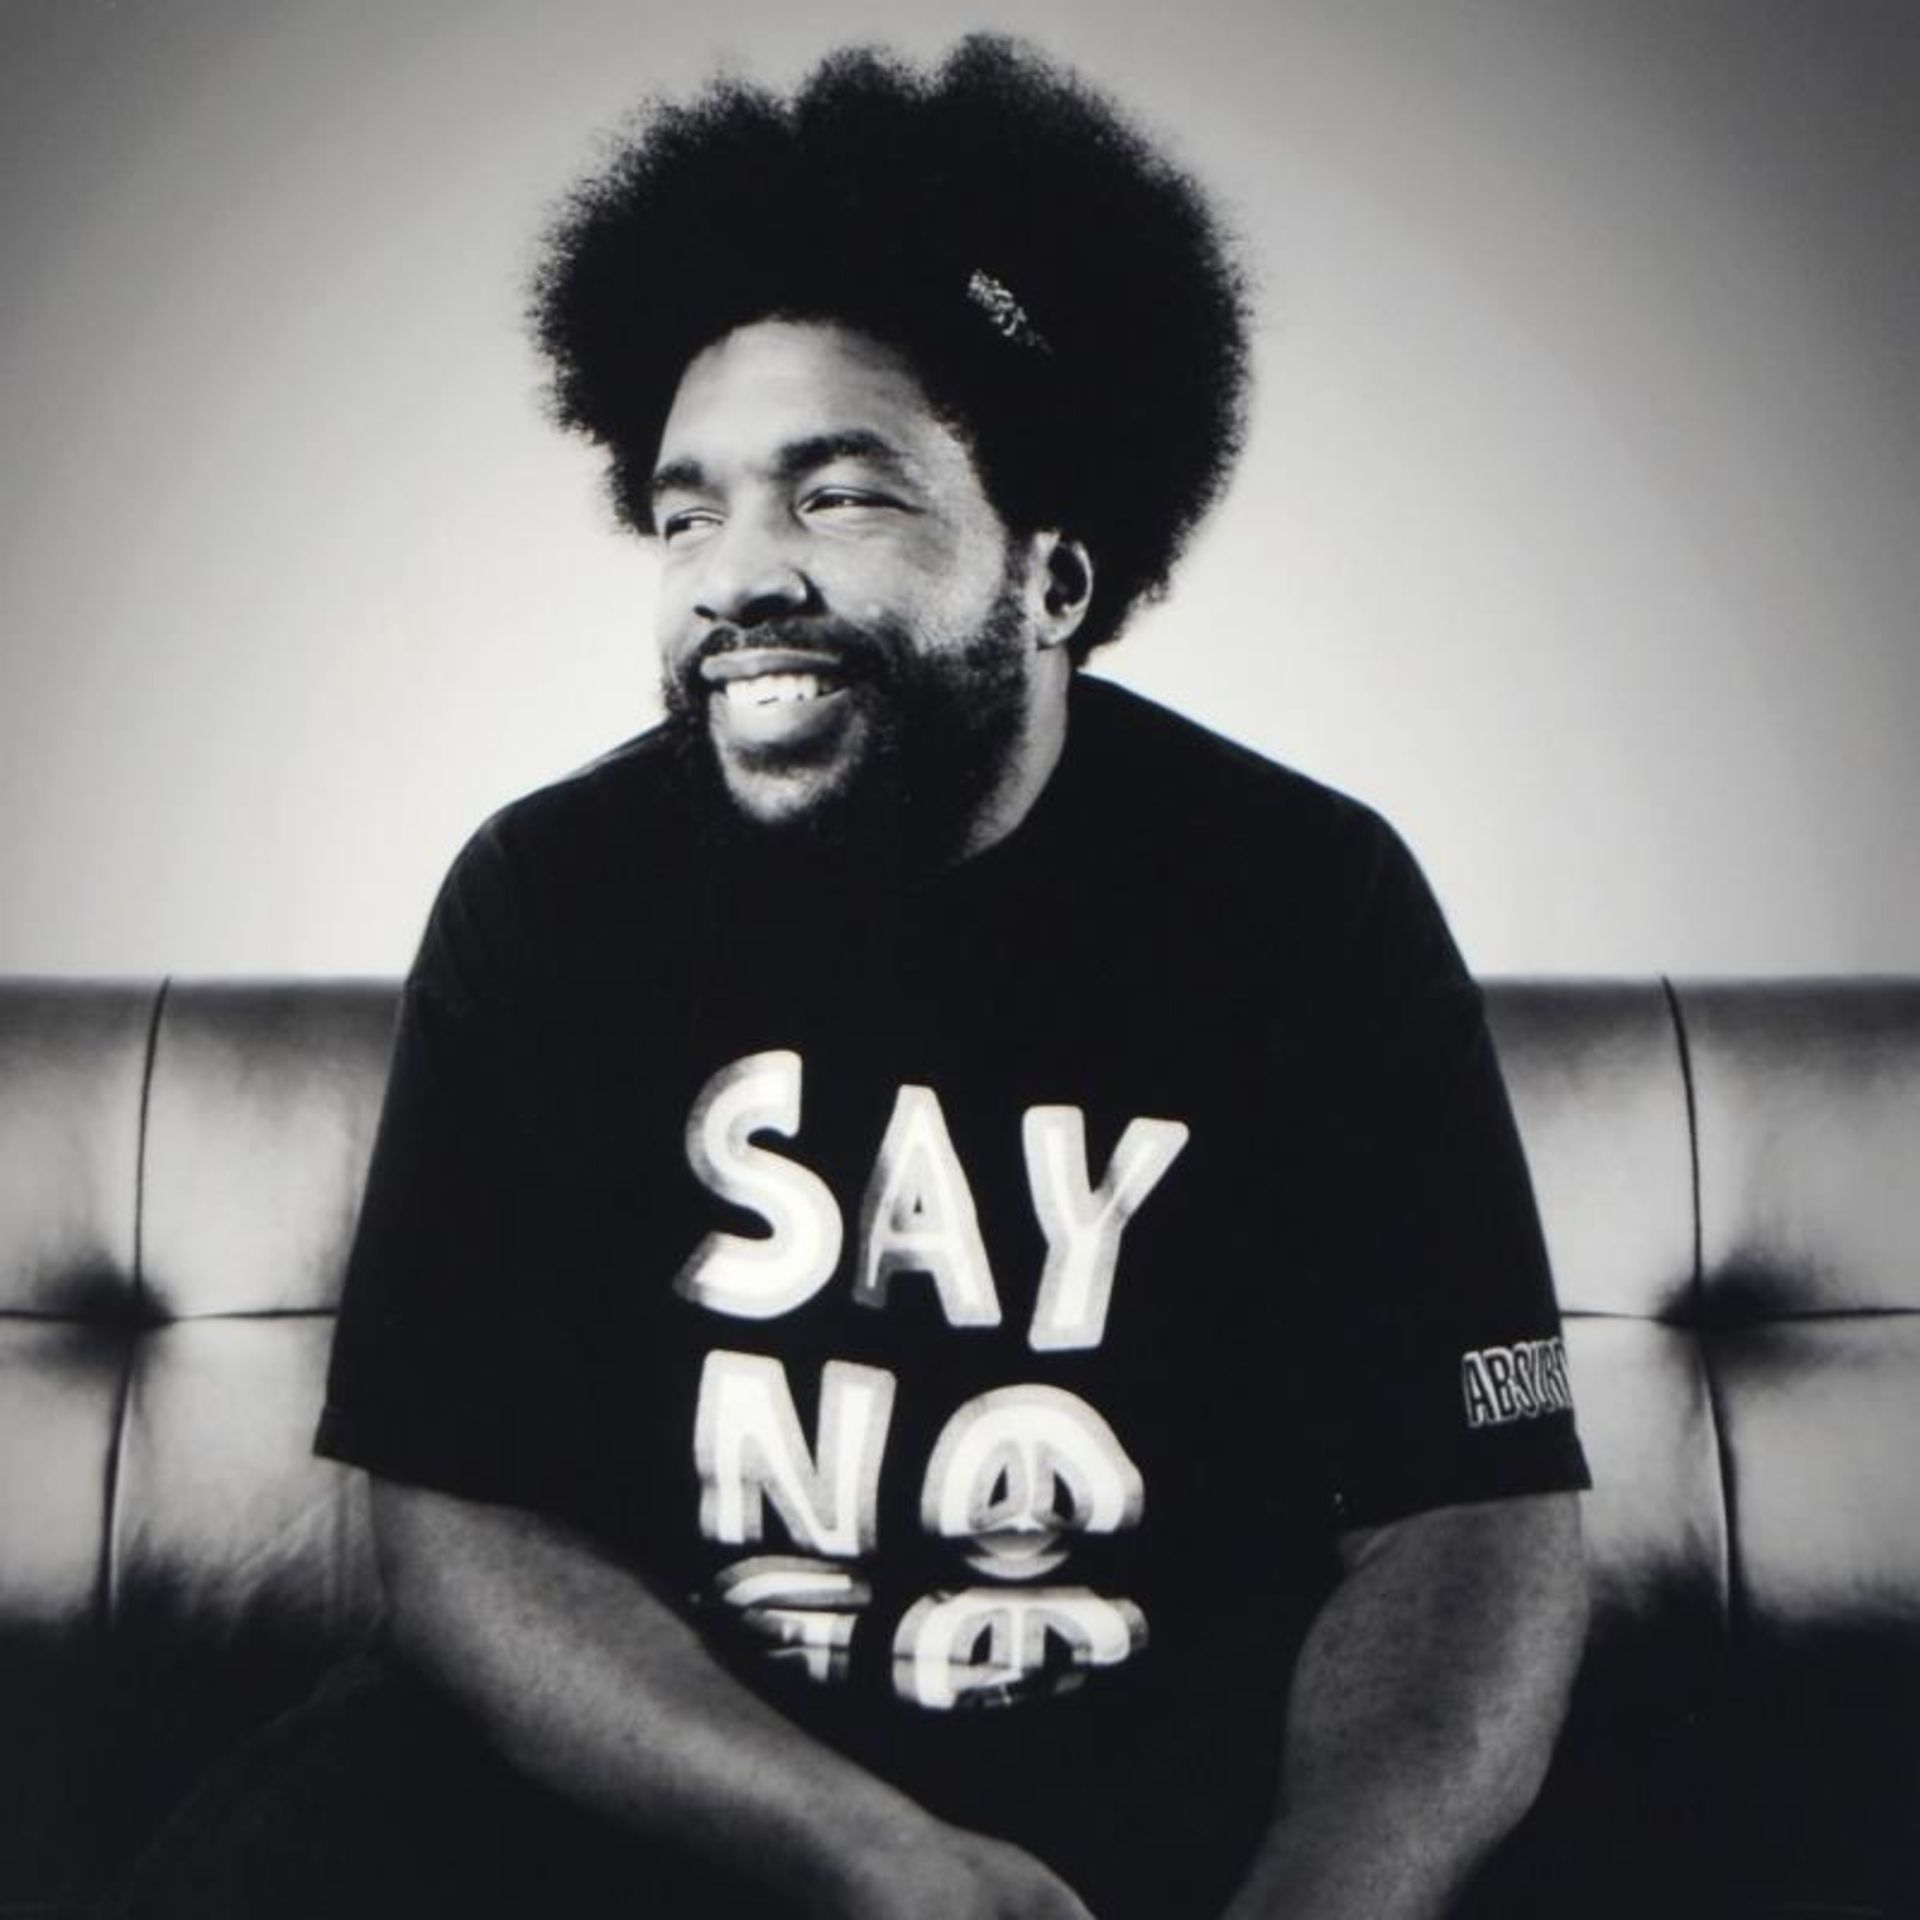 Questlove by Shanahan, Rob - Image 4 of 4